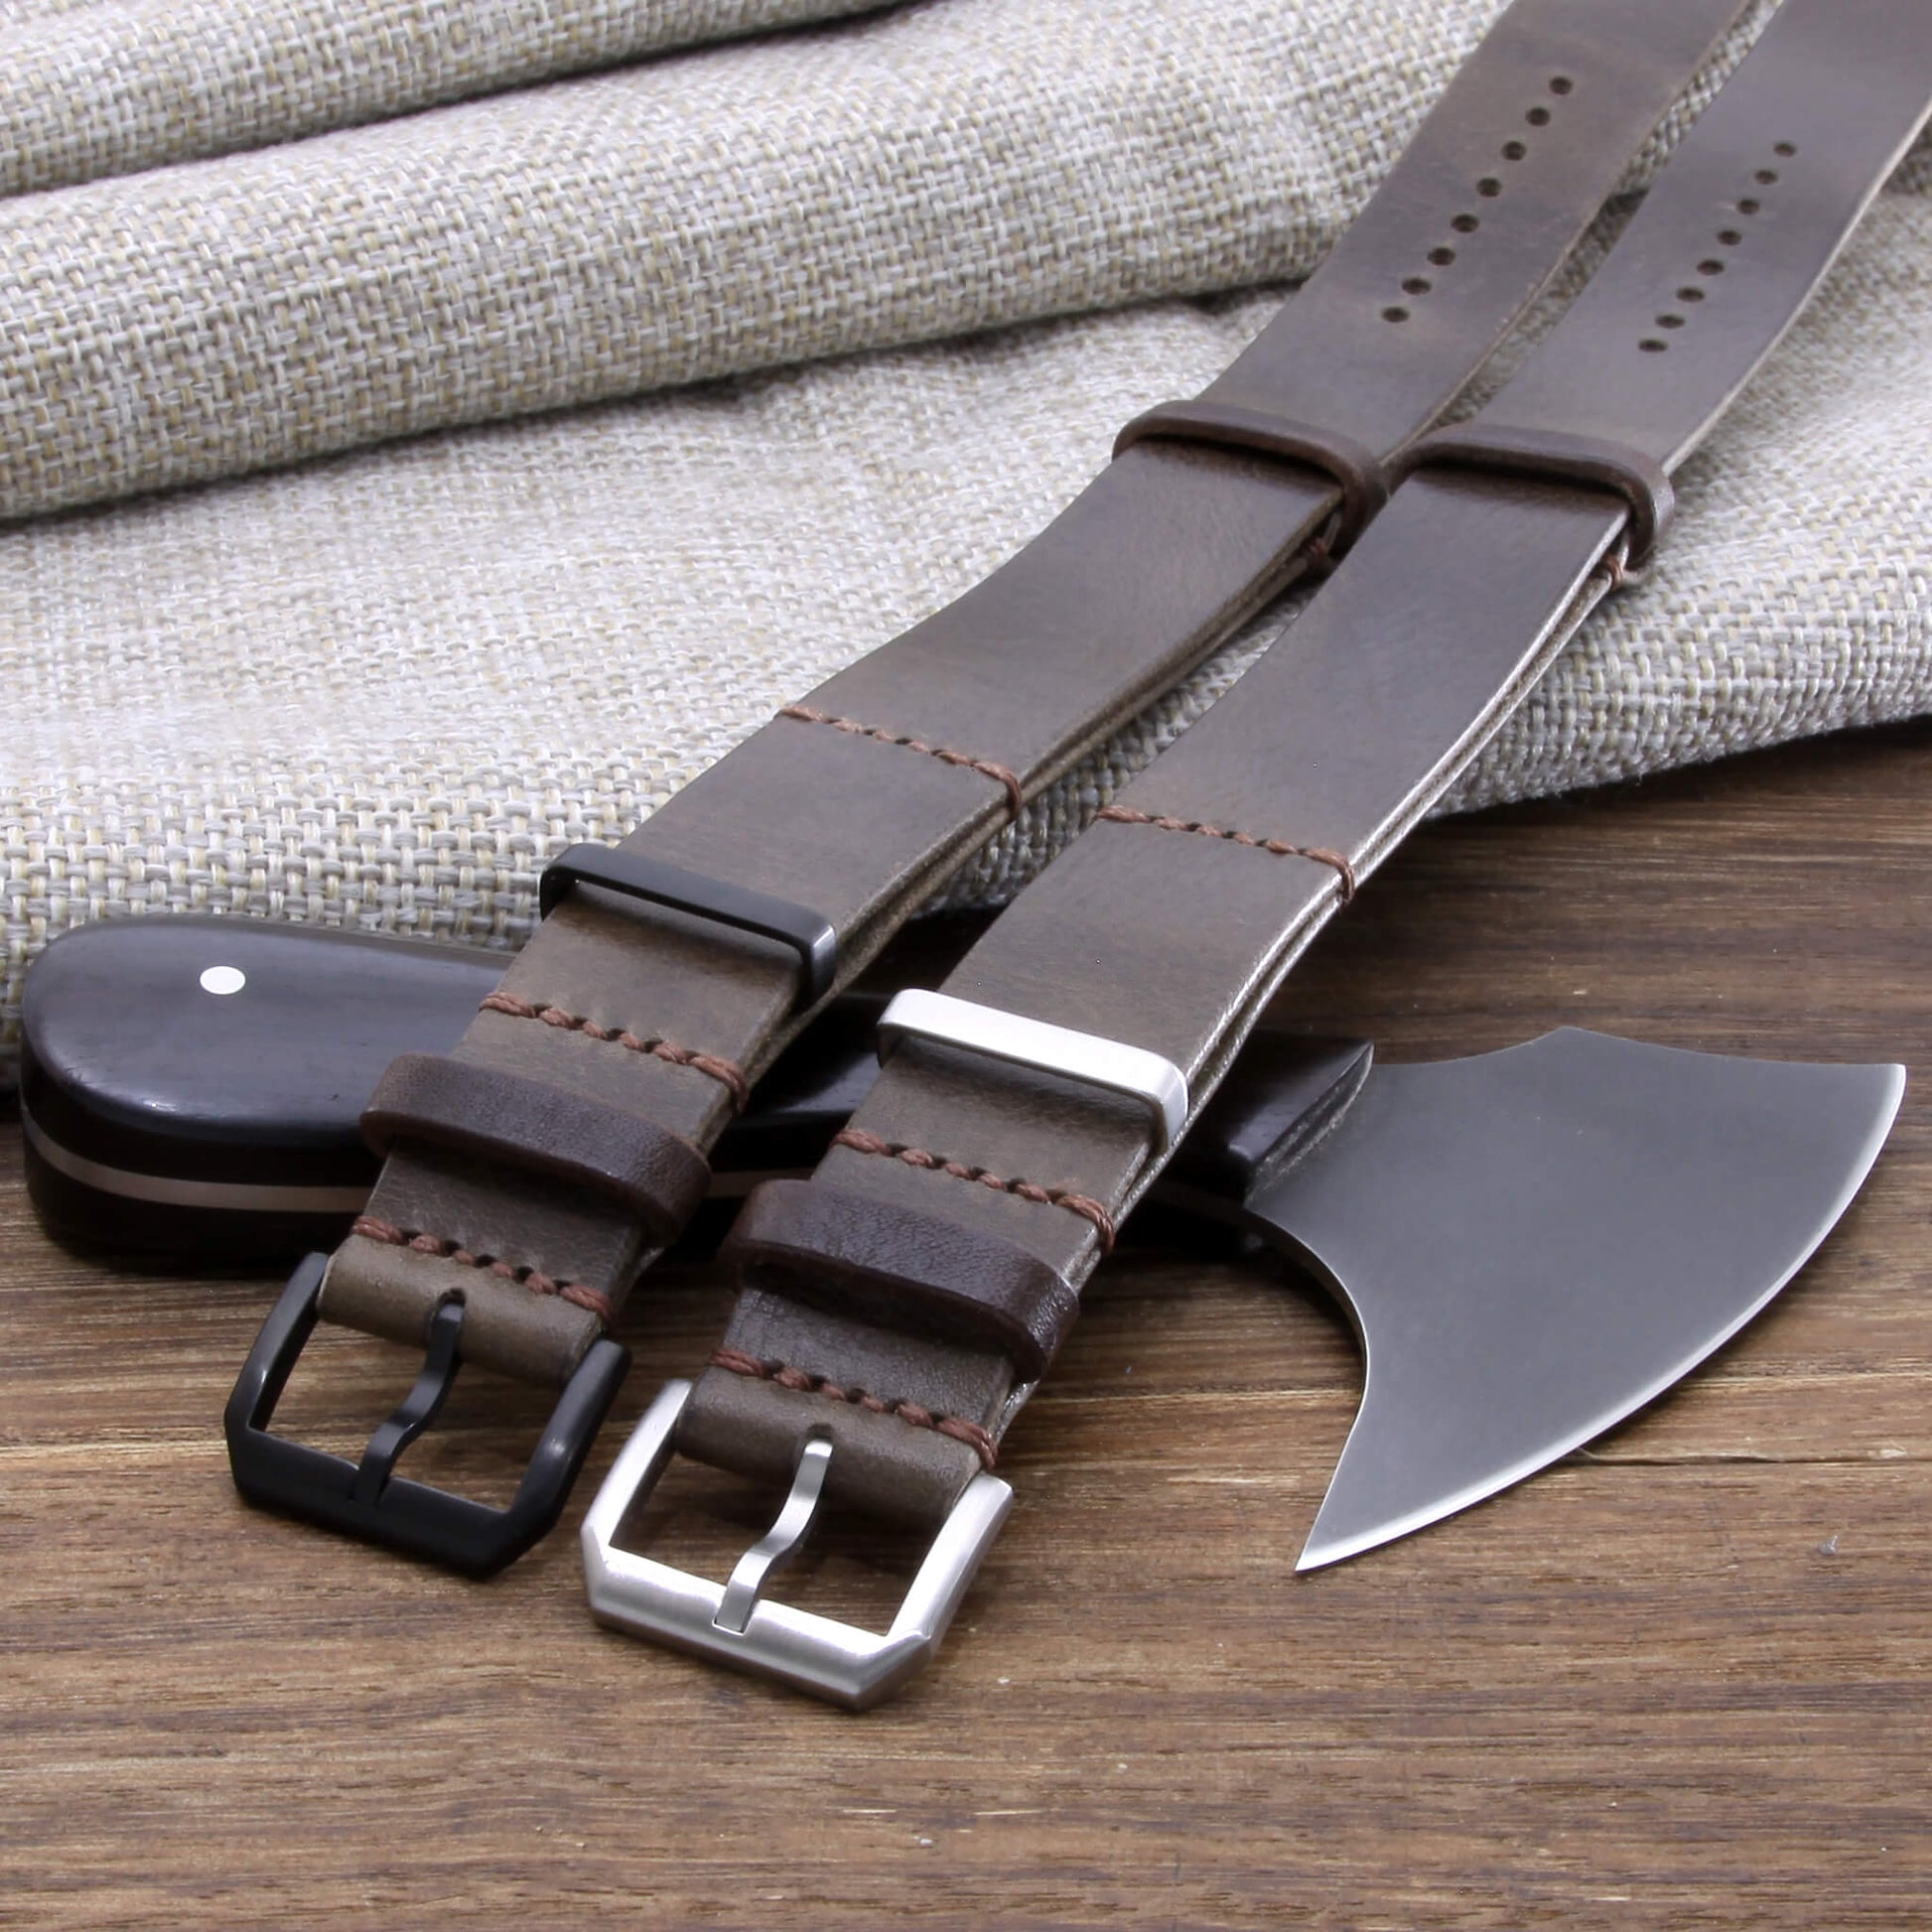 NAT2 Stylish Leather Watch Strap, Douglas 116 Dark Olive Grey available in brush steel and black PVD buckle, made with full grain Italian veg-tanned leather by Cozy Handmade